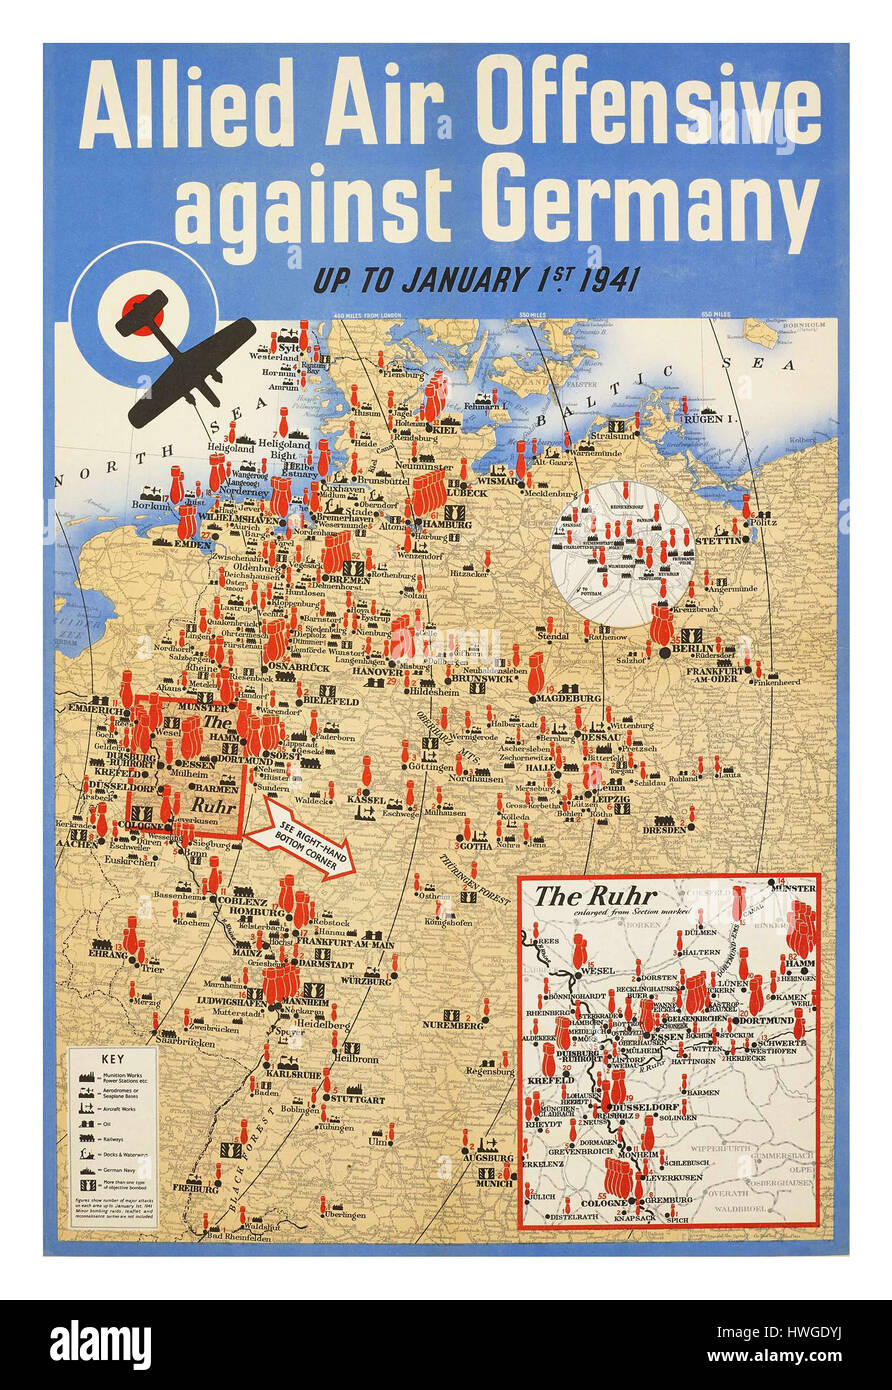 ALLIED AIR OFFENSIVE AGAINST GERMANY 1941 Vintage retro poster WW2 map detailing locations of various allied air attacks throughout Germany during World War II; image illustrates map of Germany with various locations highlighted in red and black symbols indicating targets and intensity levels of the various UK bombing raids Stock Photo